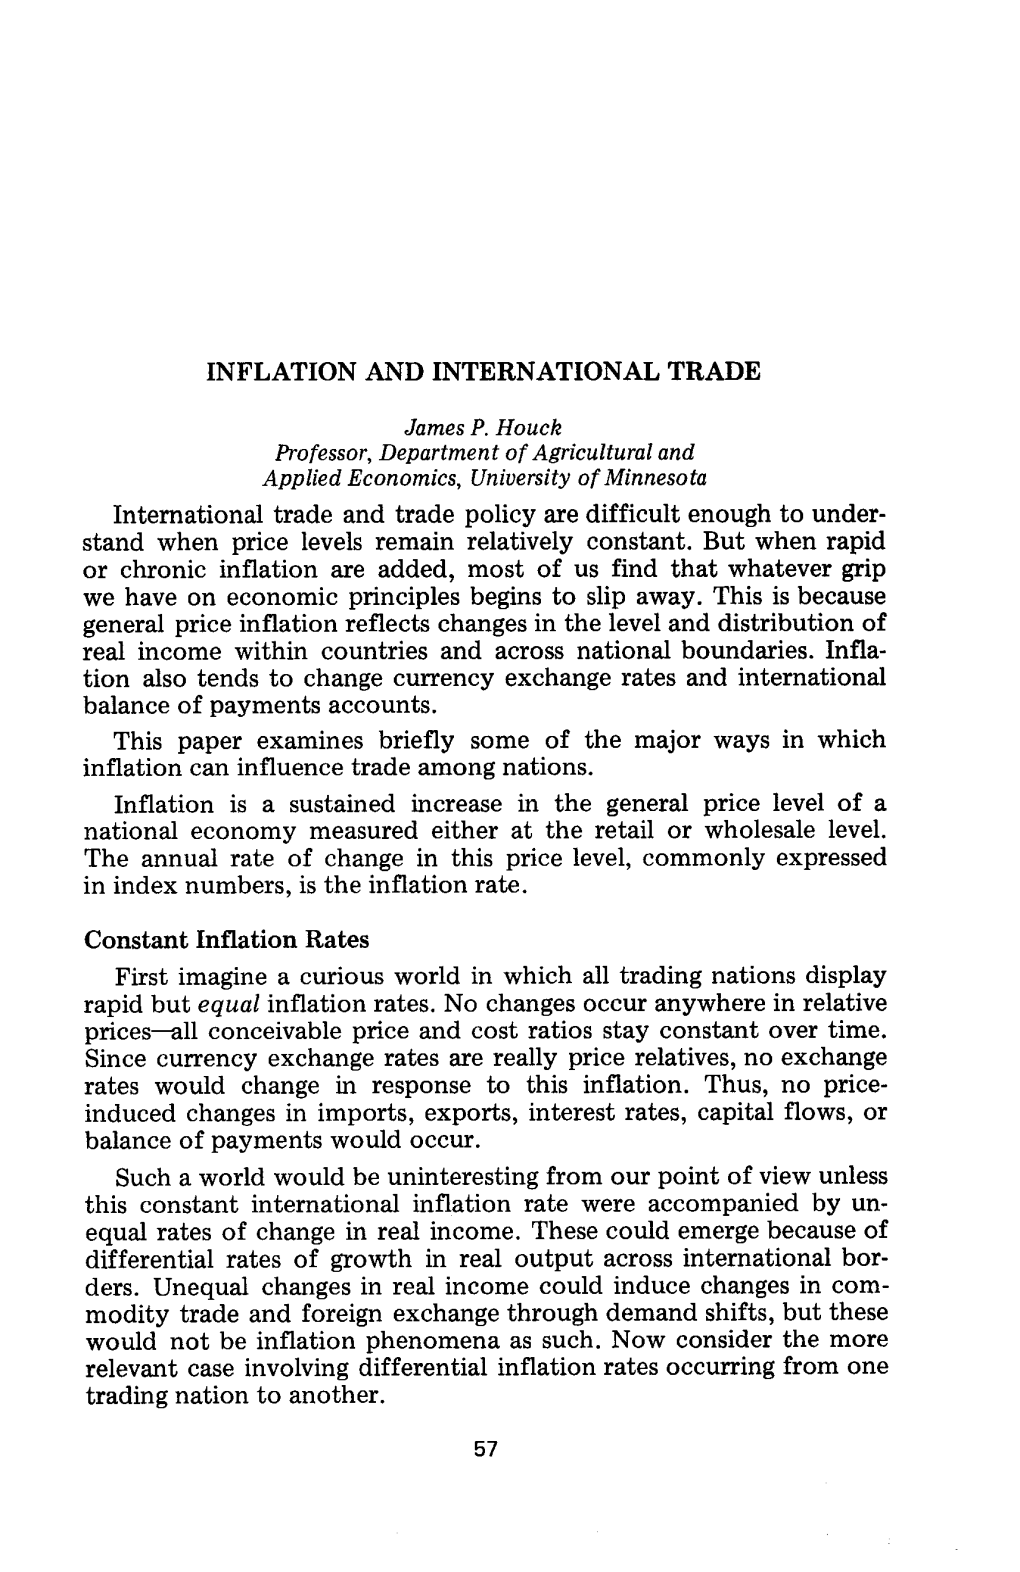 Inflation and International Trade